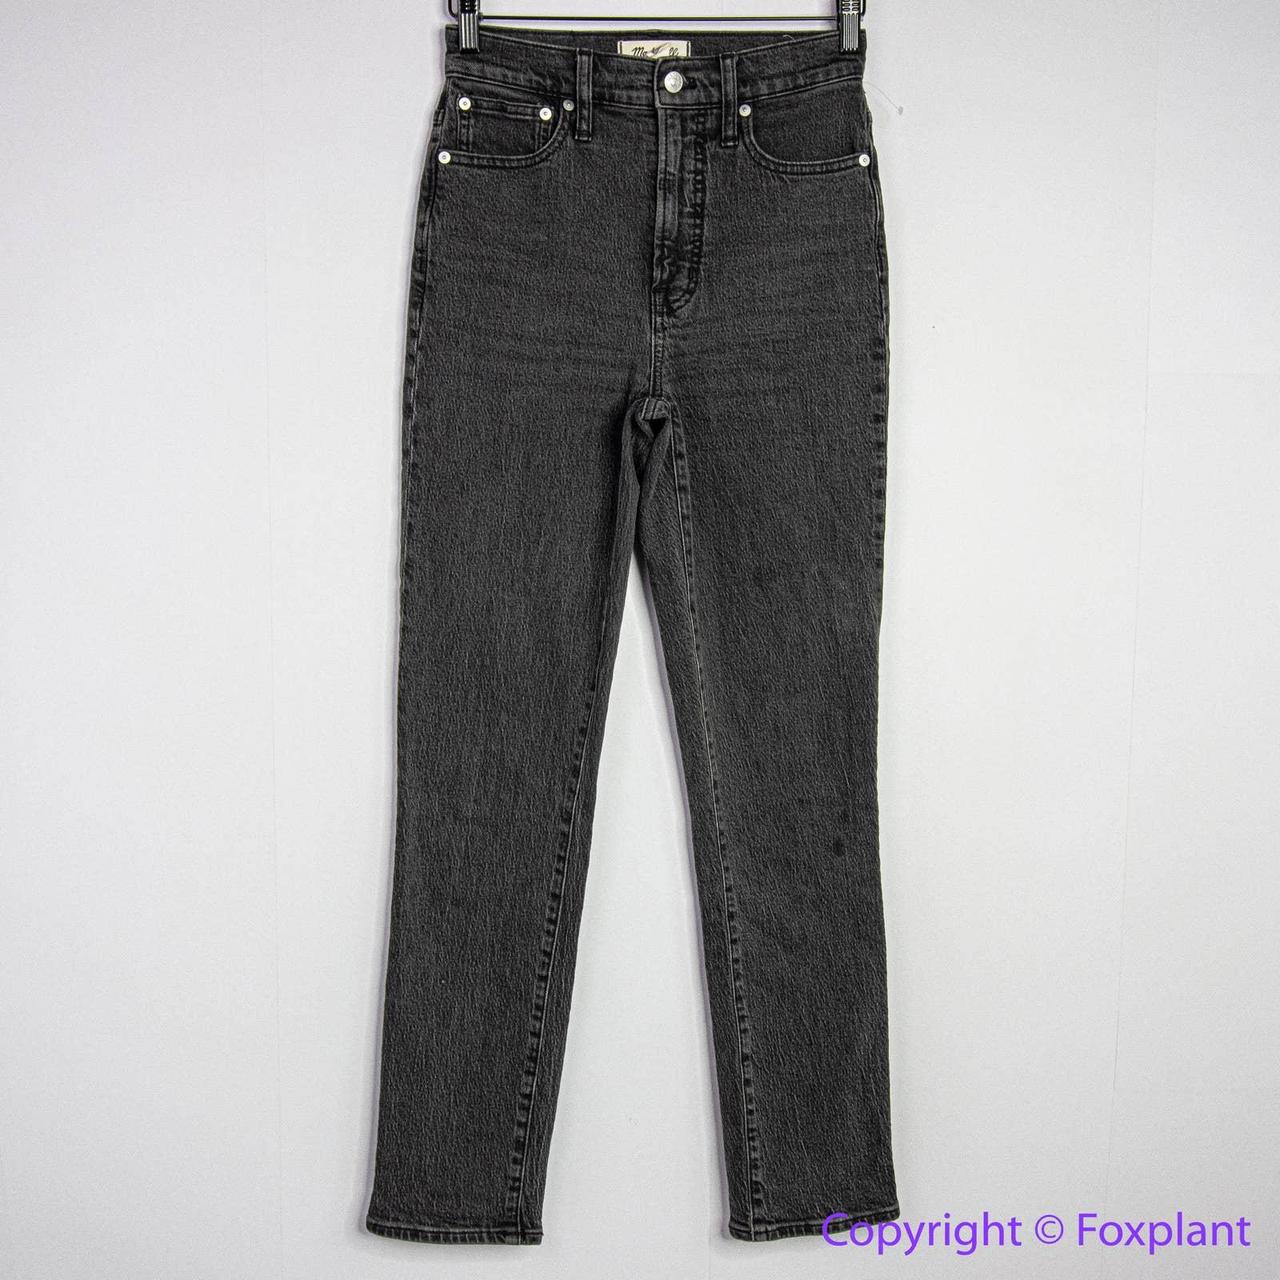 NEW Madewell The tall Perfect Vintage Jean in lunar... - Depop